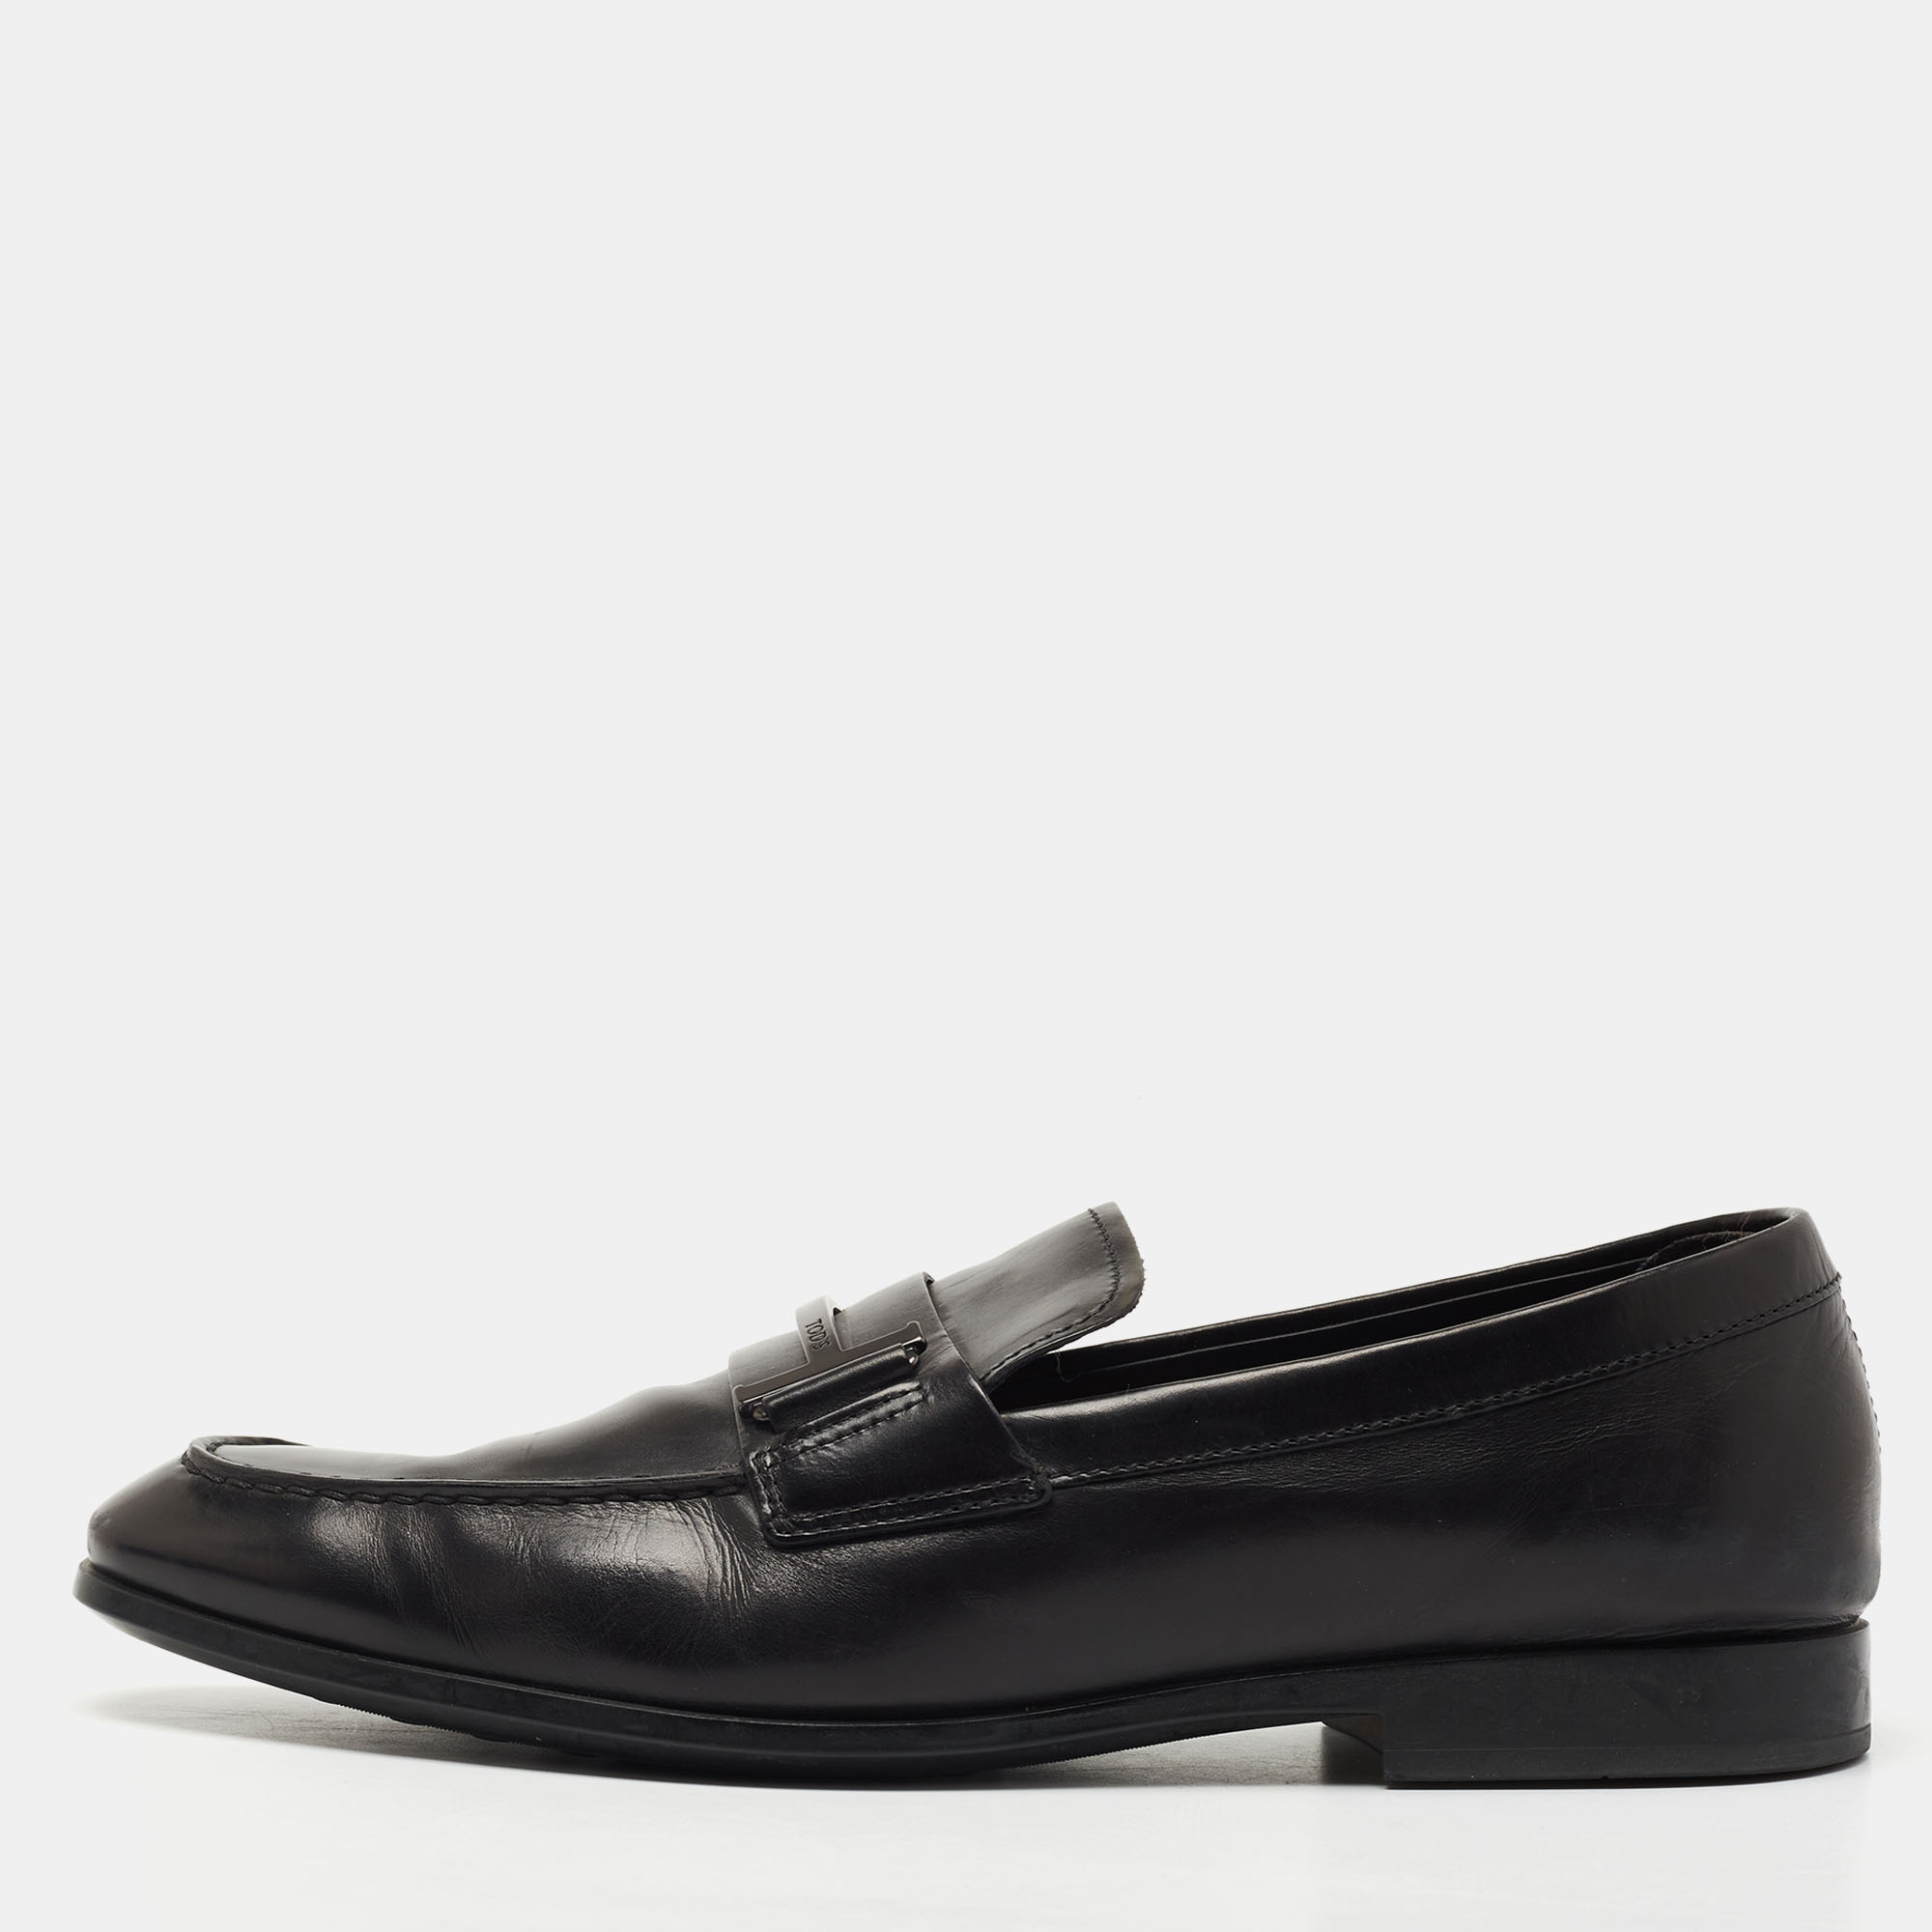 Pre-owned Tod's Black Leather Slip On Loafer Size 42